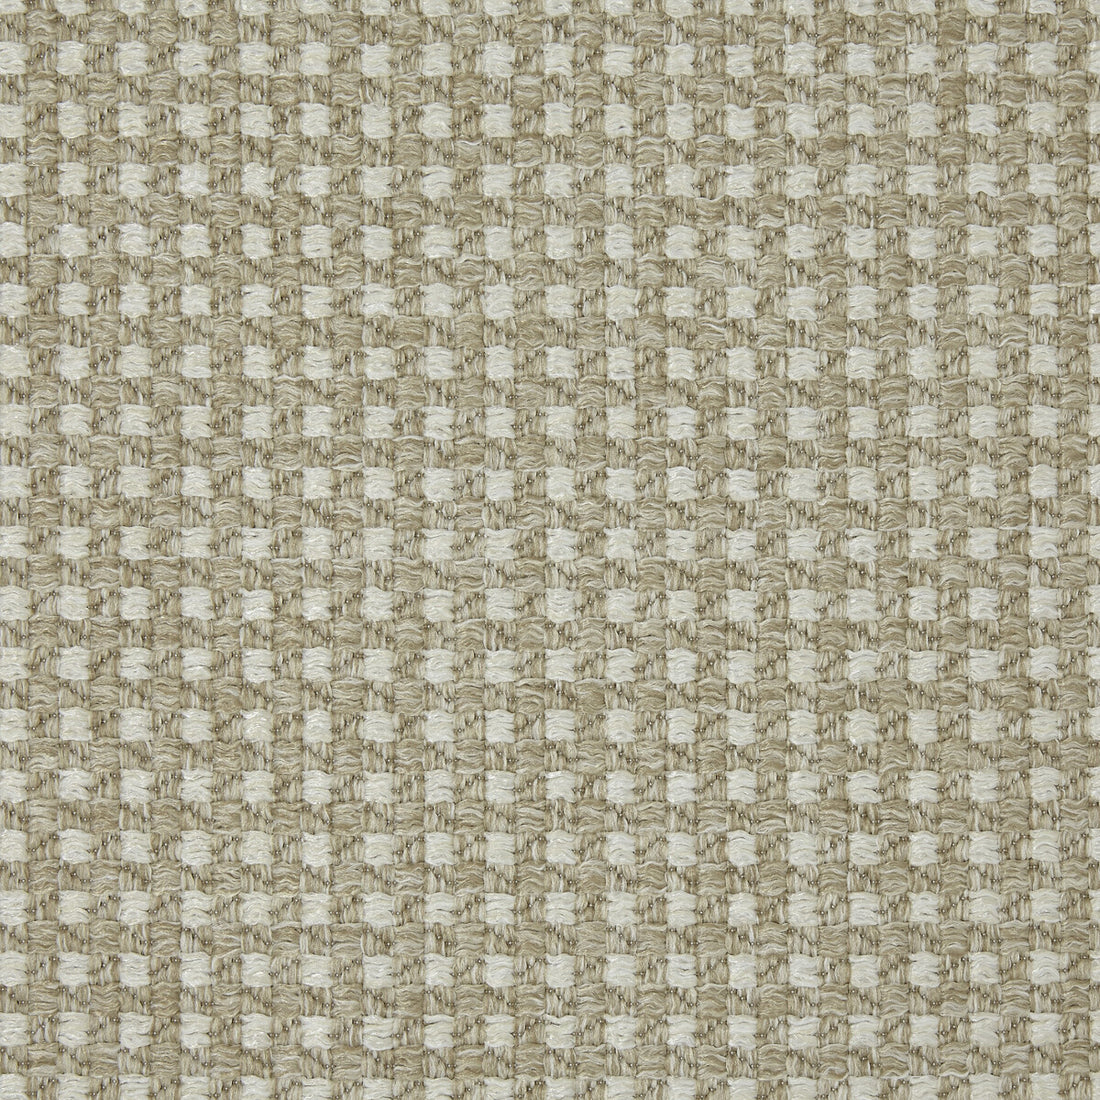 Bovary fabric in 7 color - pattern LZ-30336.07.0 - by Kravet Design in the Lizzo Indoor/Outdoor collection